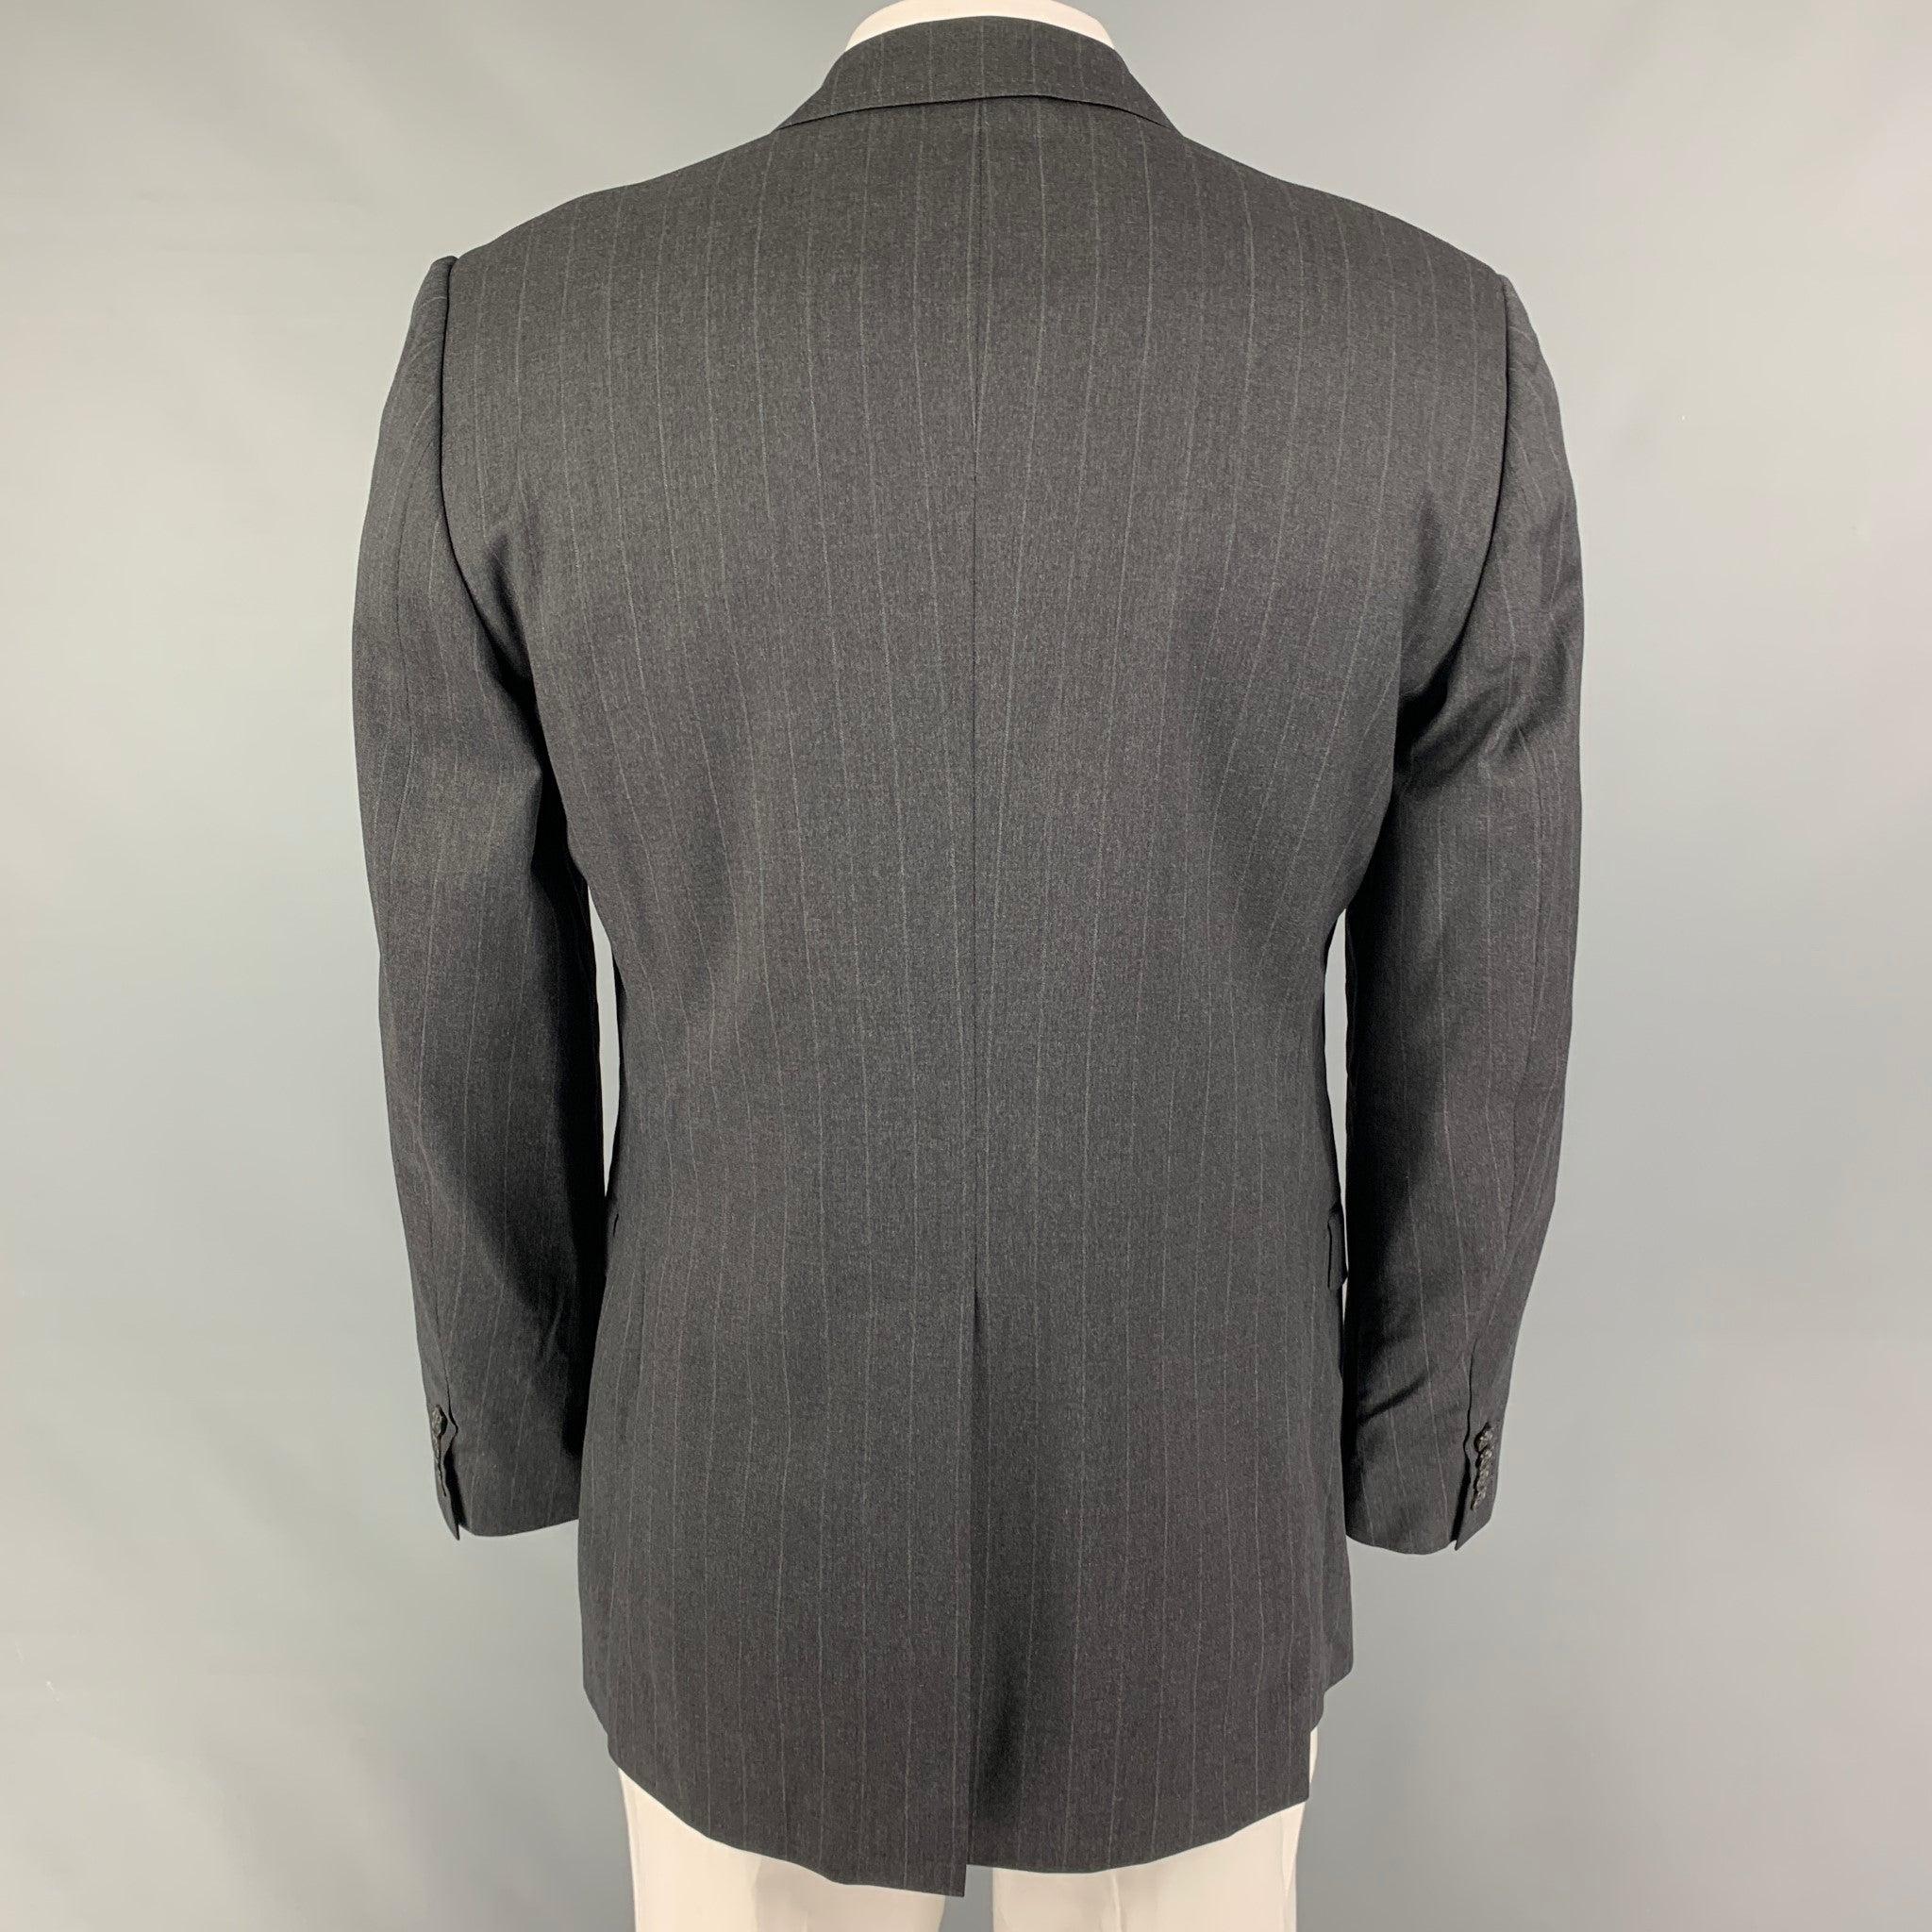 DOLCE & GABBANA Size 44 Charcoal Pinstripe Virgin Wool Sport Coat In Good Condition For Sale In San Francisco, CA